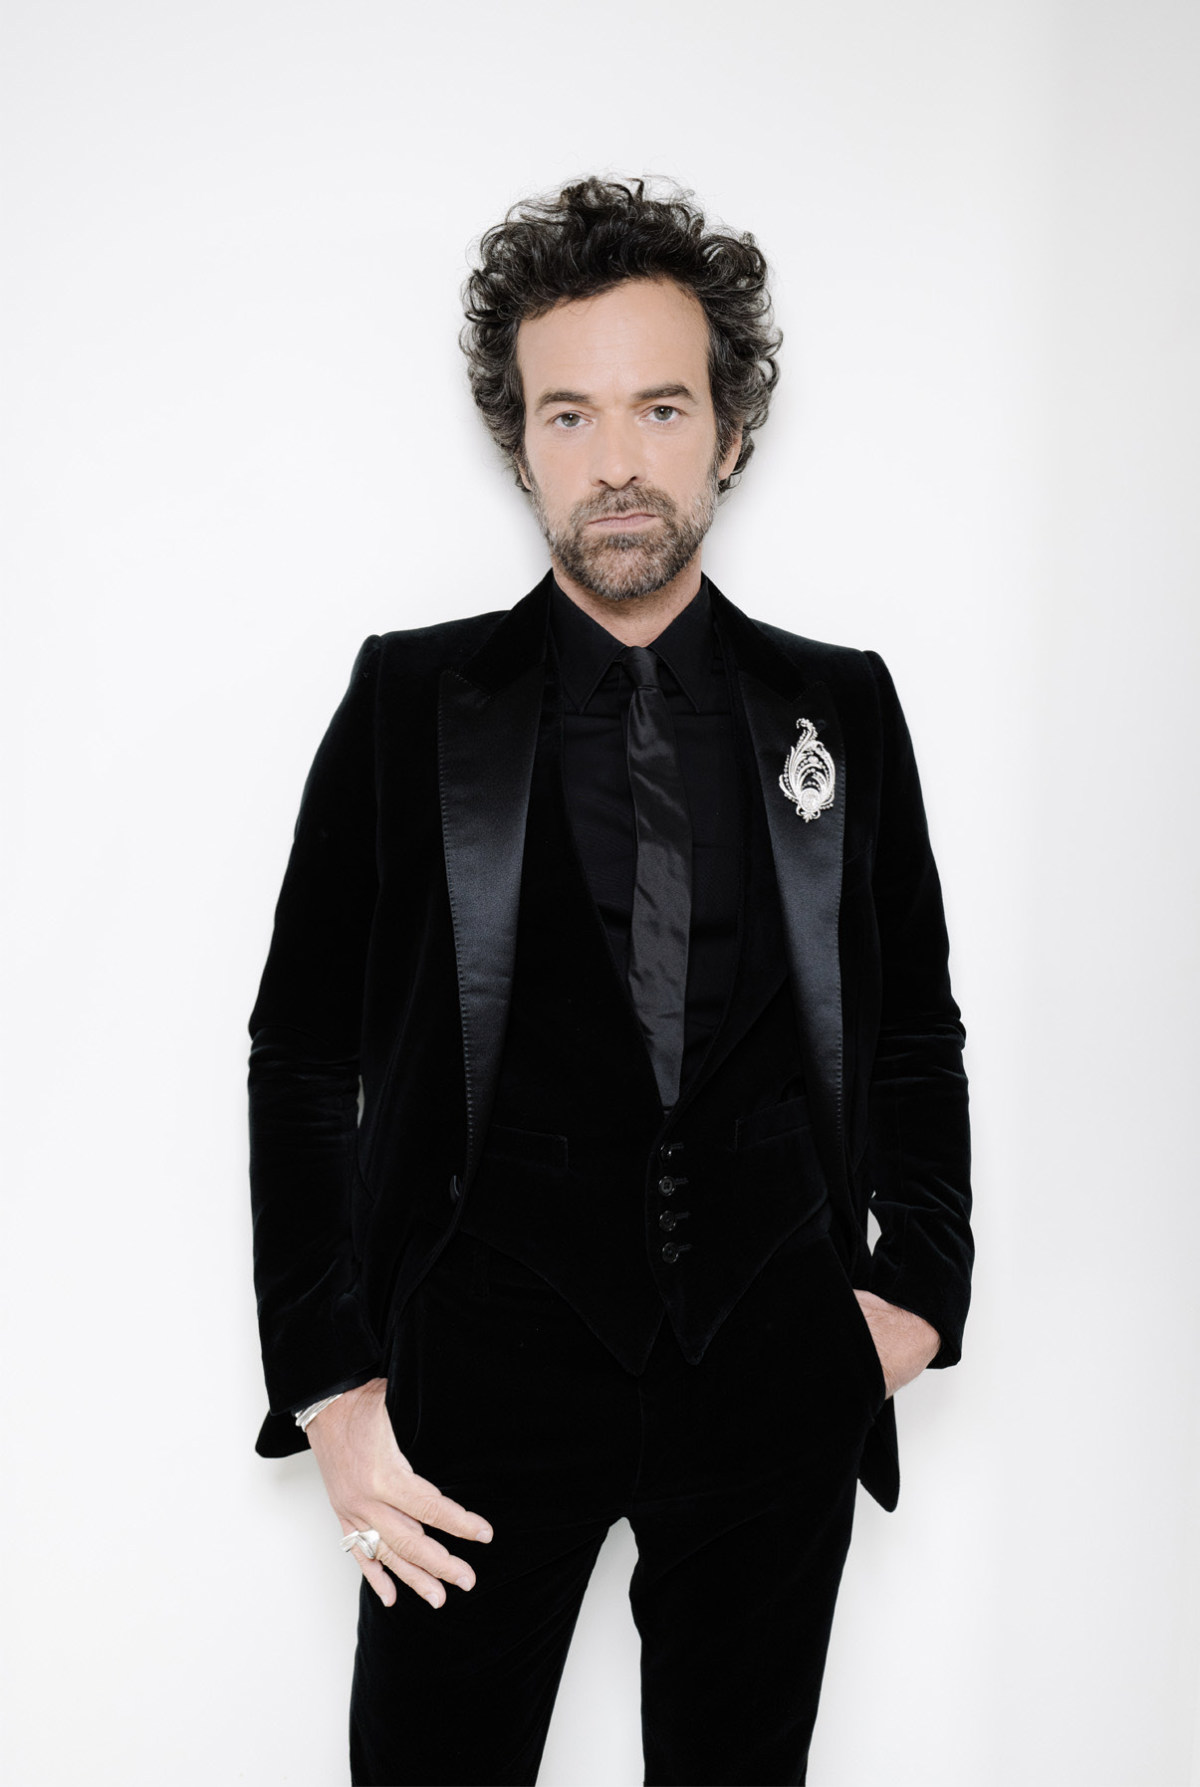 Romain Duris wore CELINE HOMME during the Opening Ceremony of the 75th Cannes Film Festival